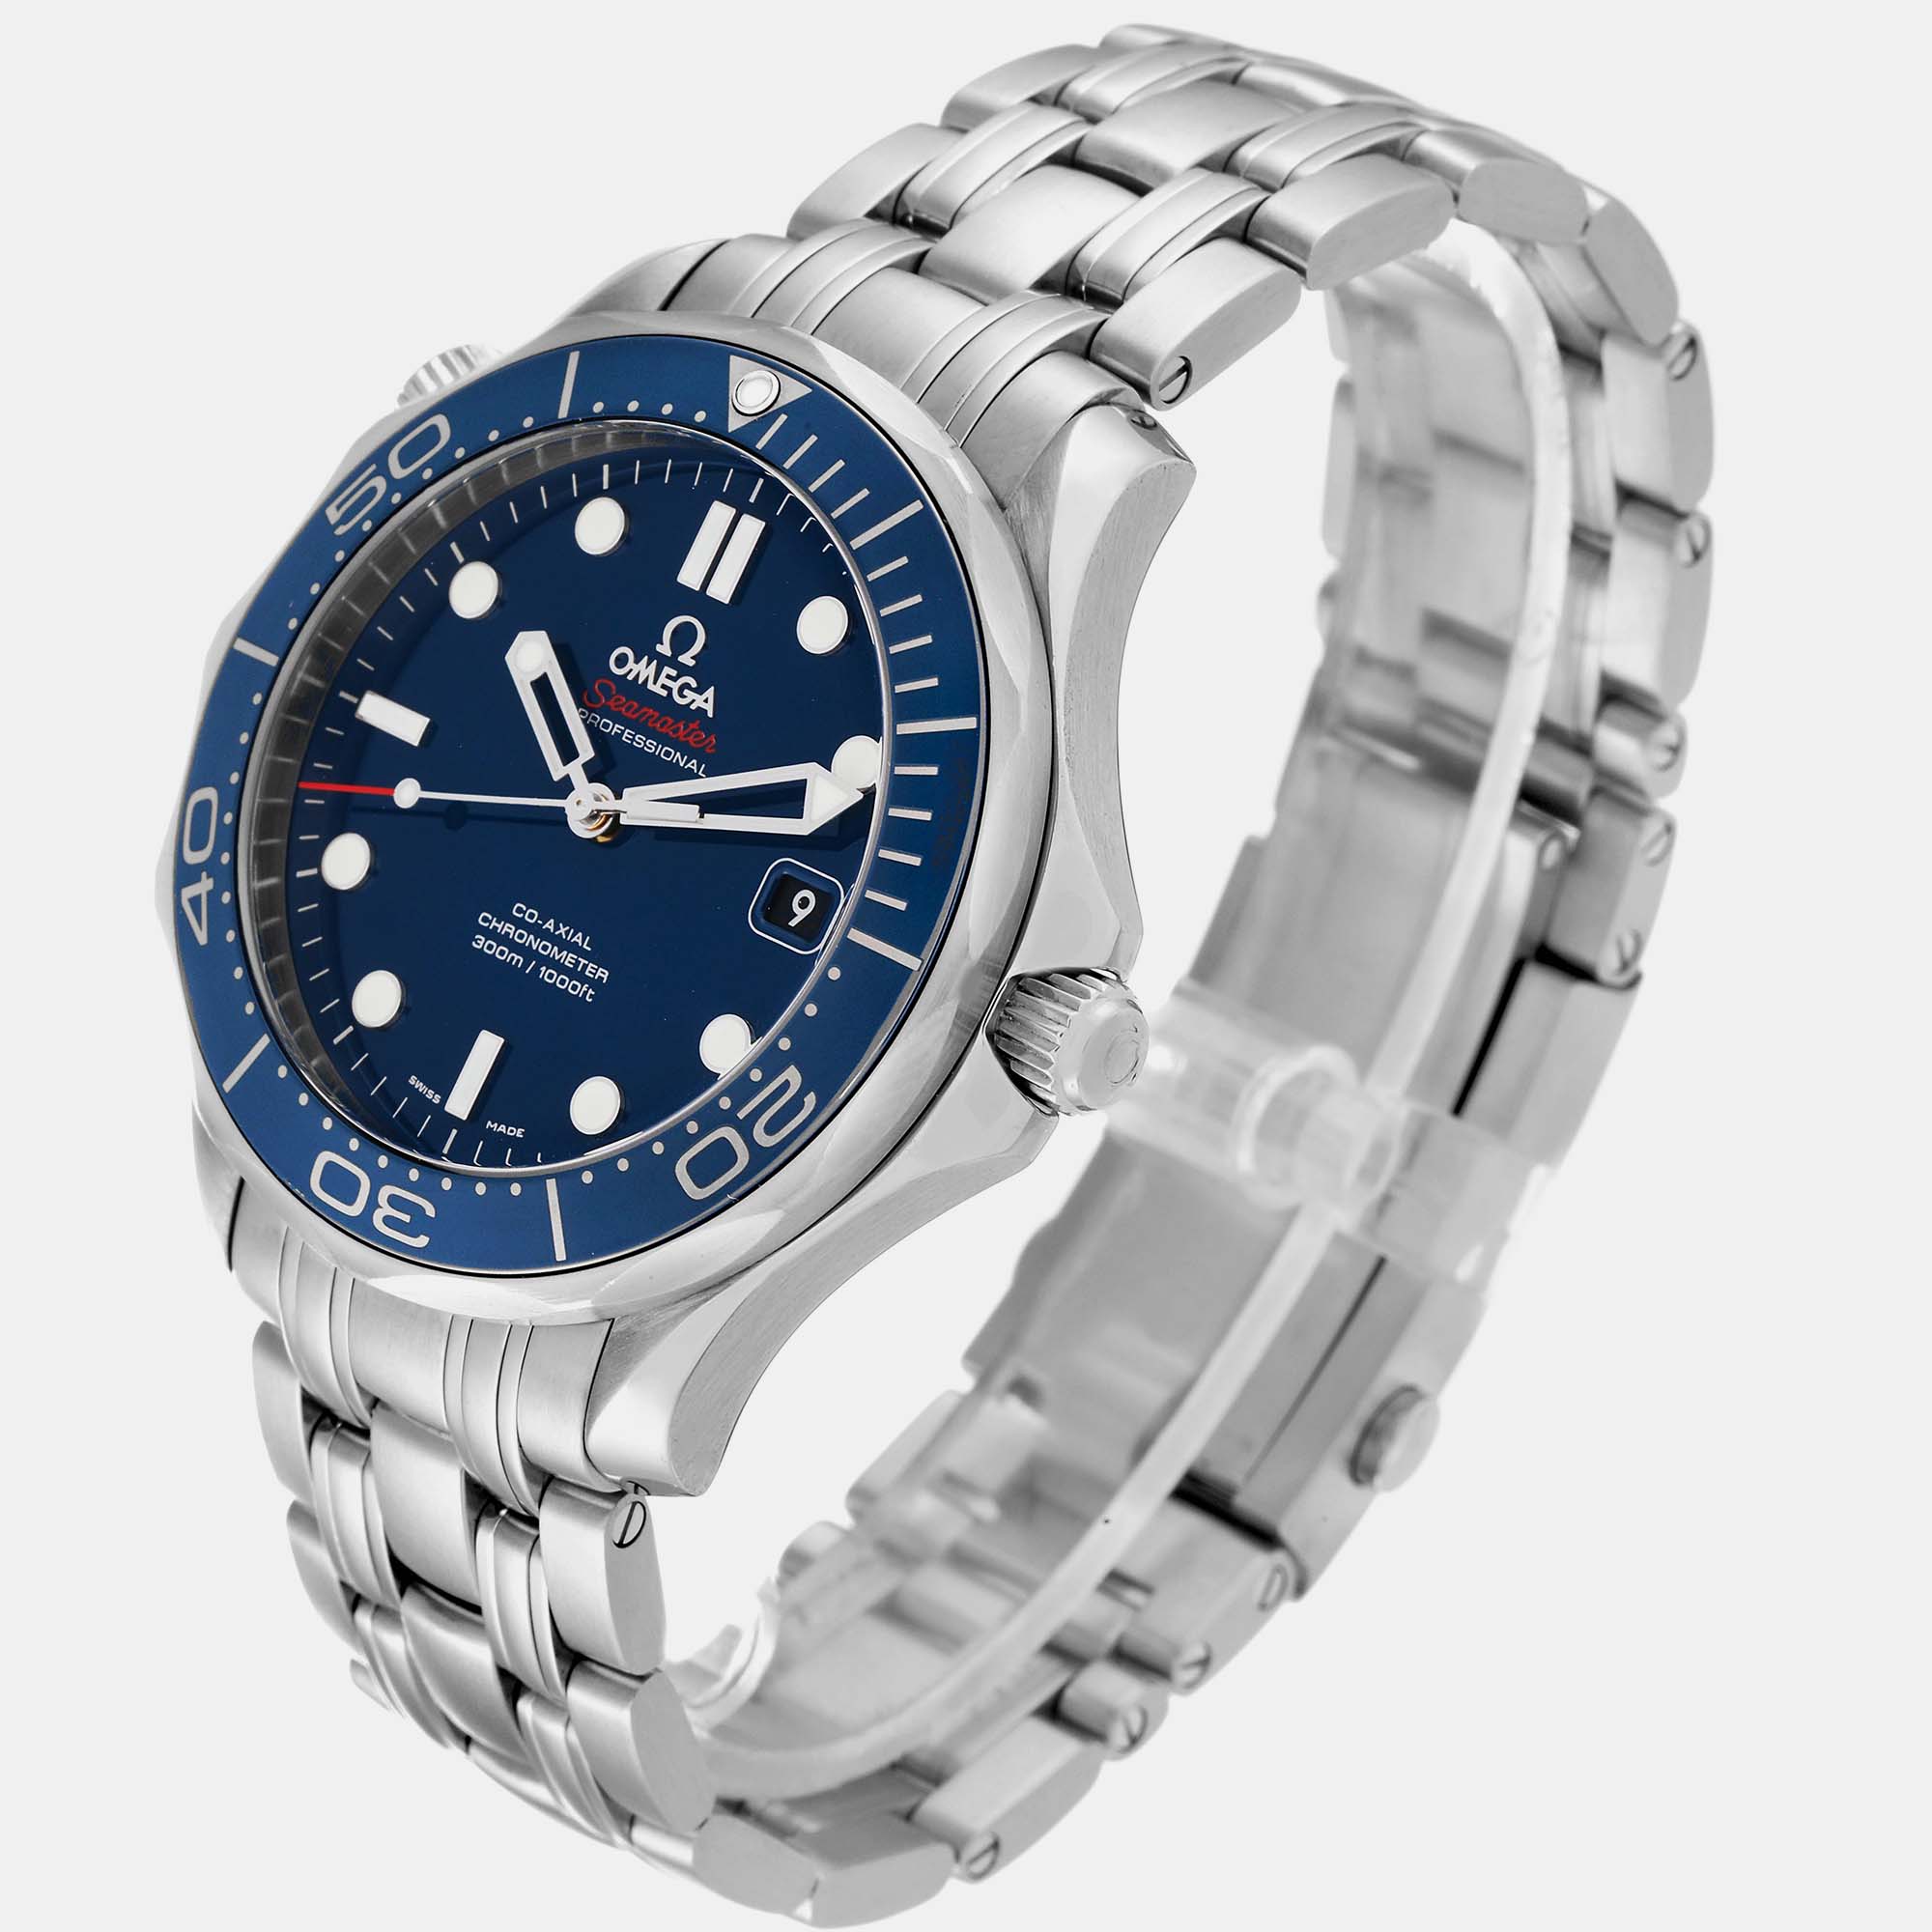 Omega Blue Stainless Steel Seamaster 212.30.41.20.03.001 Automatic Men's Wristwatch 41 Mm